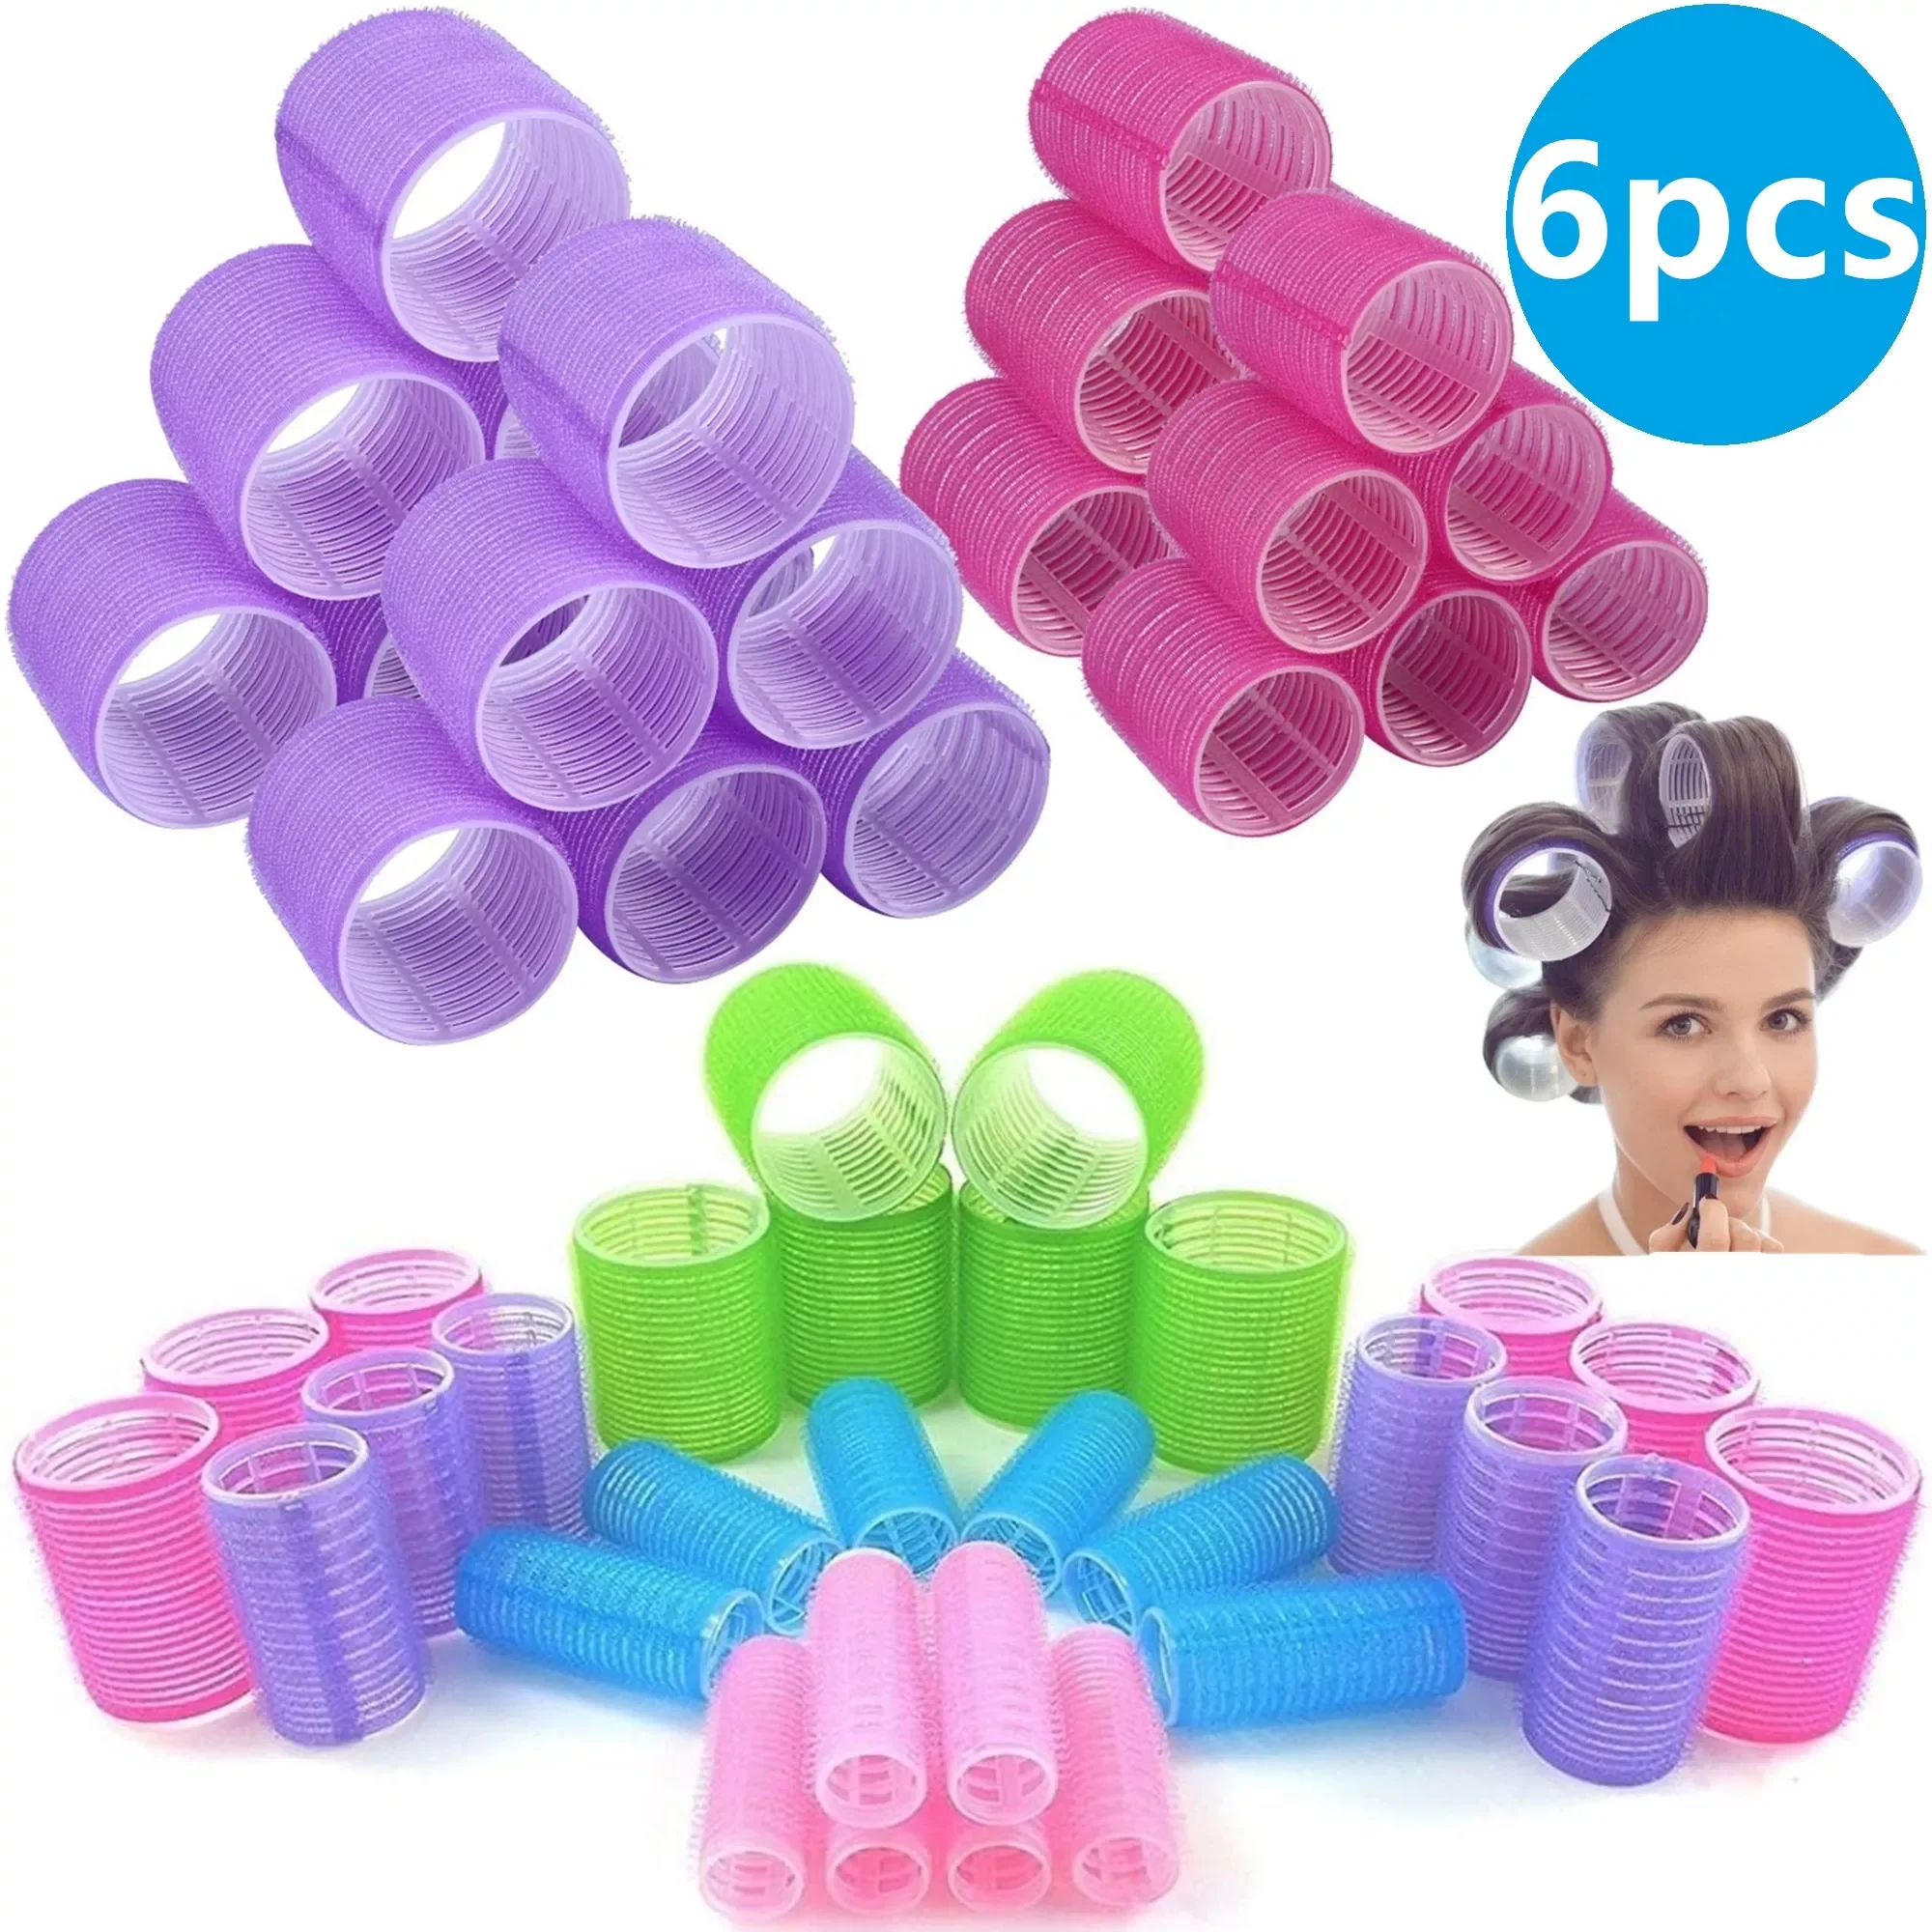 

NEW IN Rollers Self Grip Hook Hair Curlers Heatless Hair Roller Salon Hair Dressing Curlers Jumbo Size Sticky Hair Styling Tools